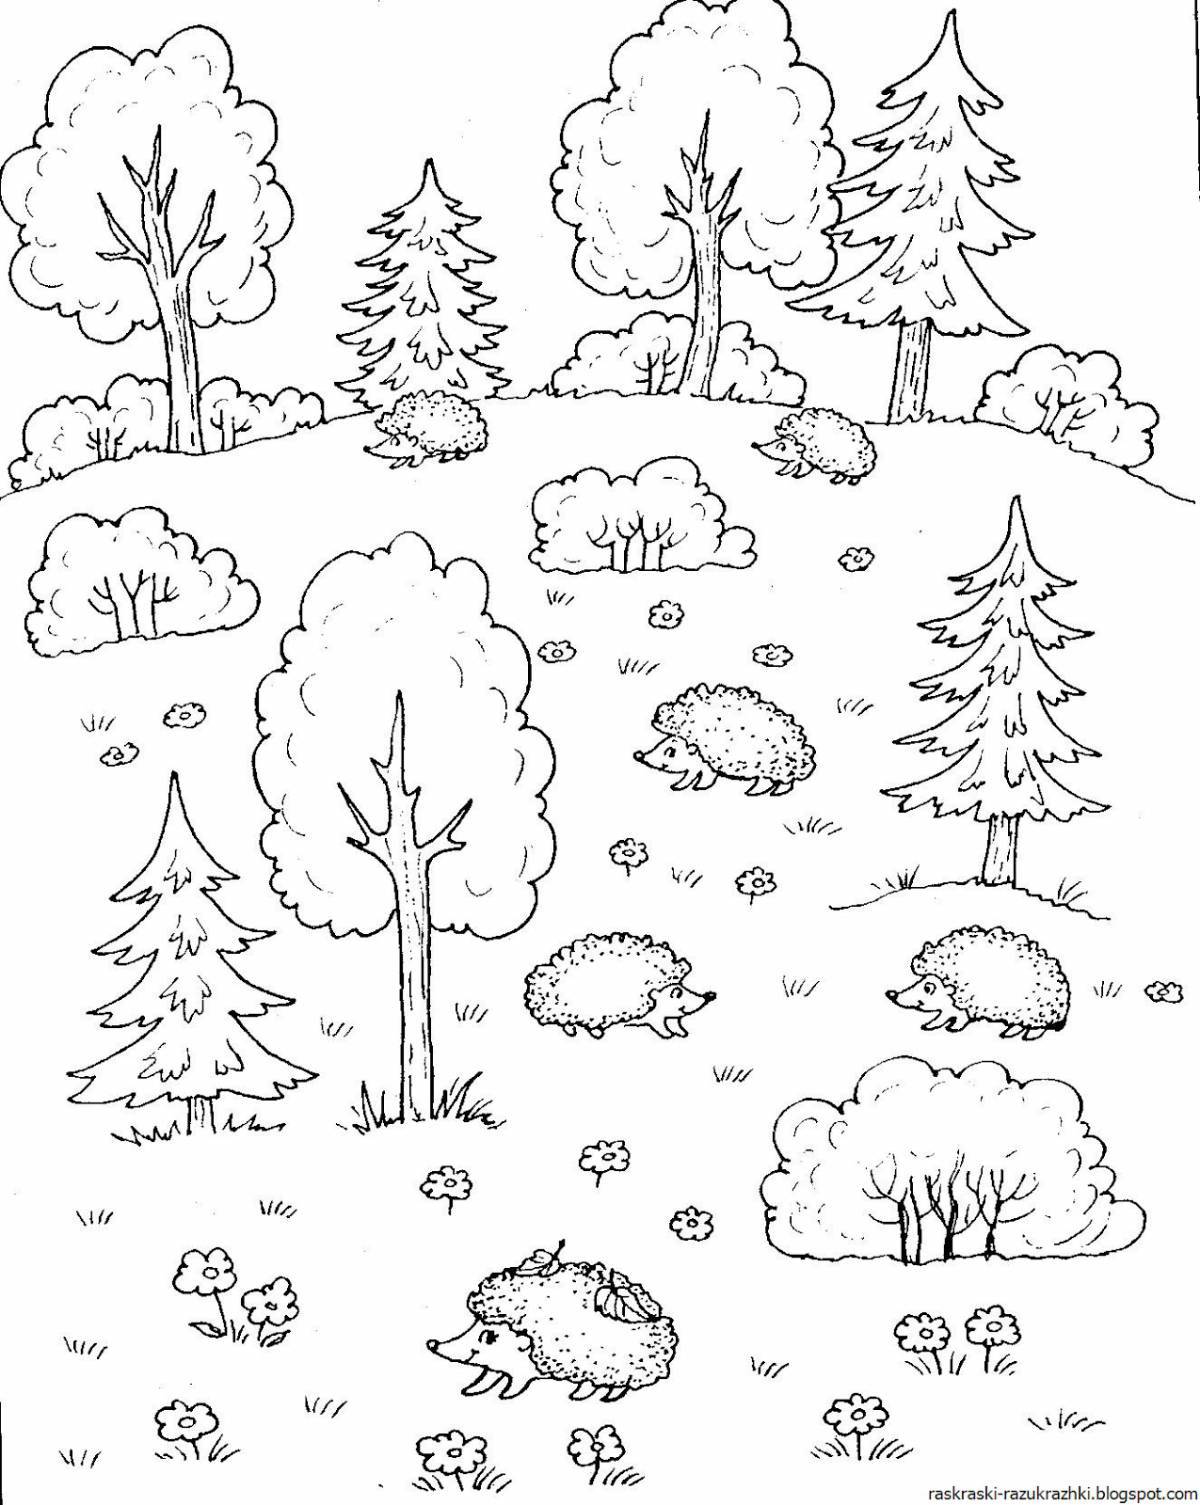 Amazing forest coloring book for kids